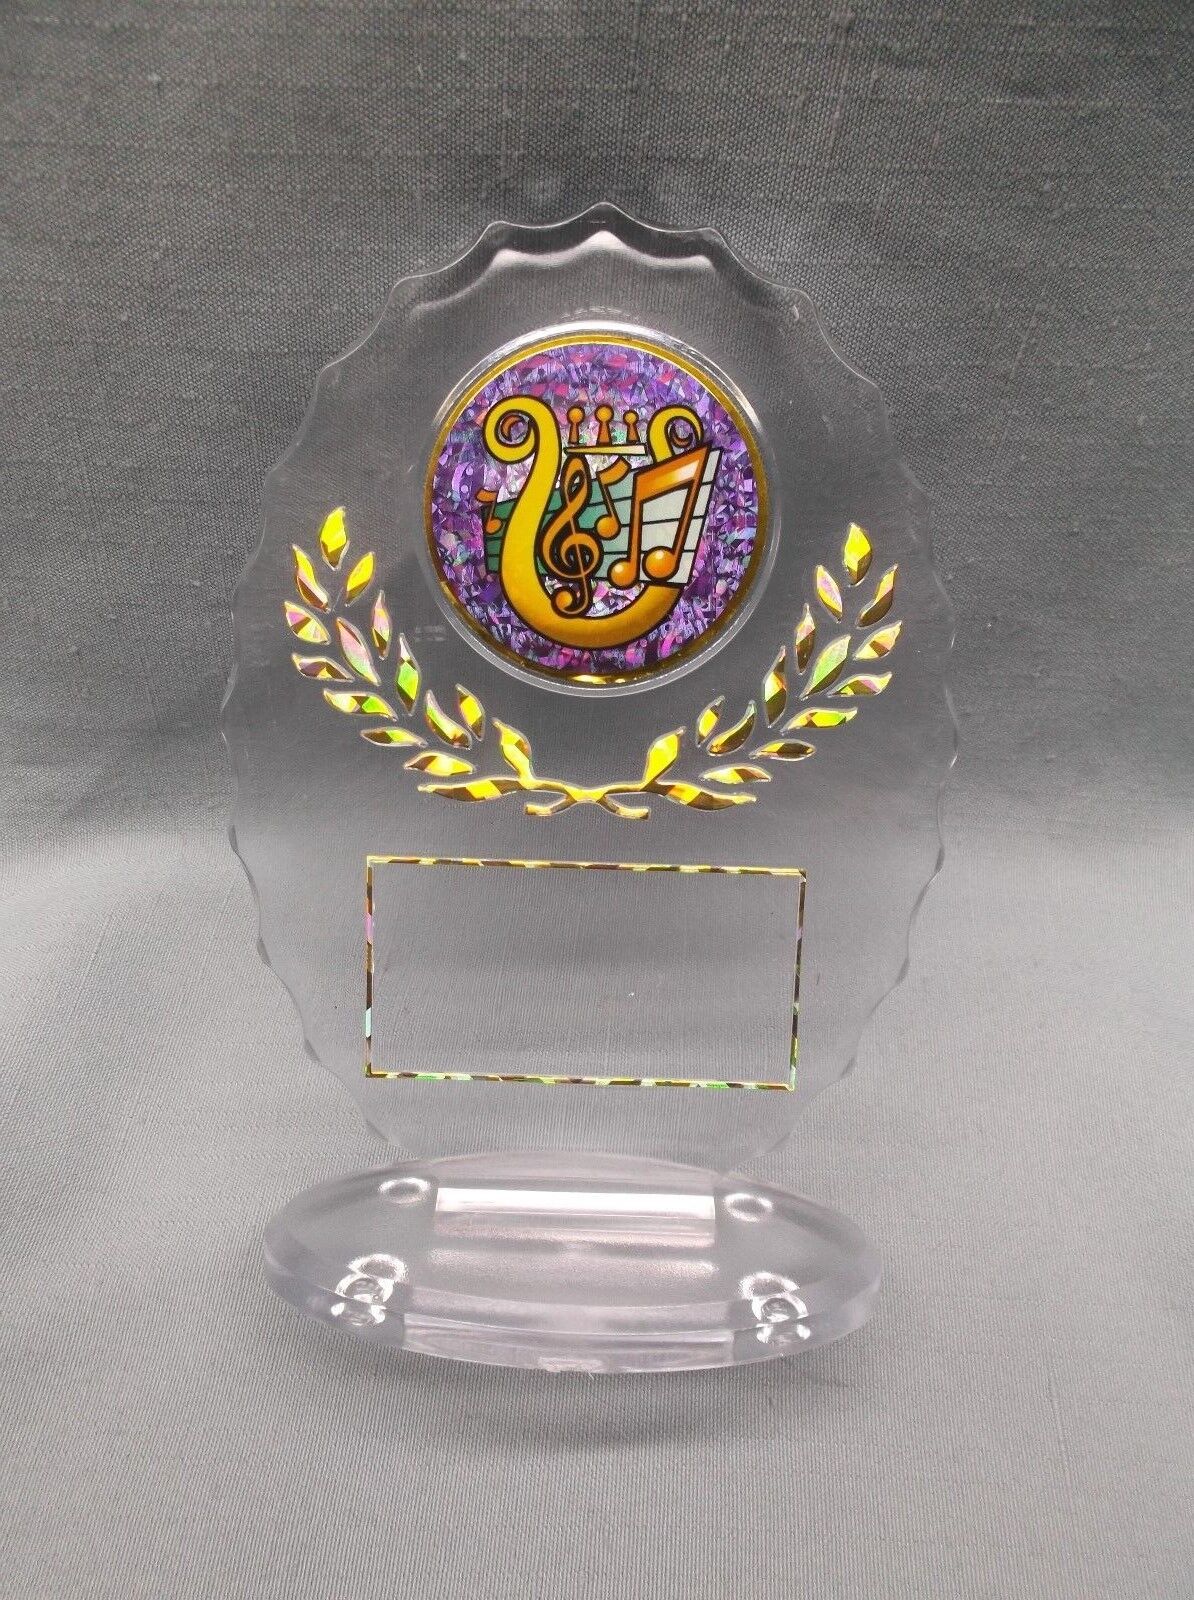 large clear music trophy oval acrylic award purple insert